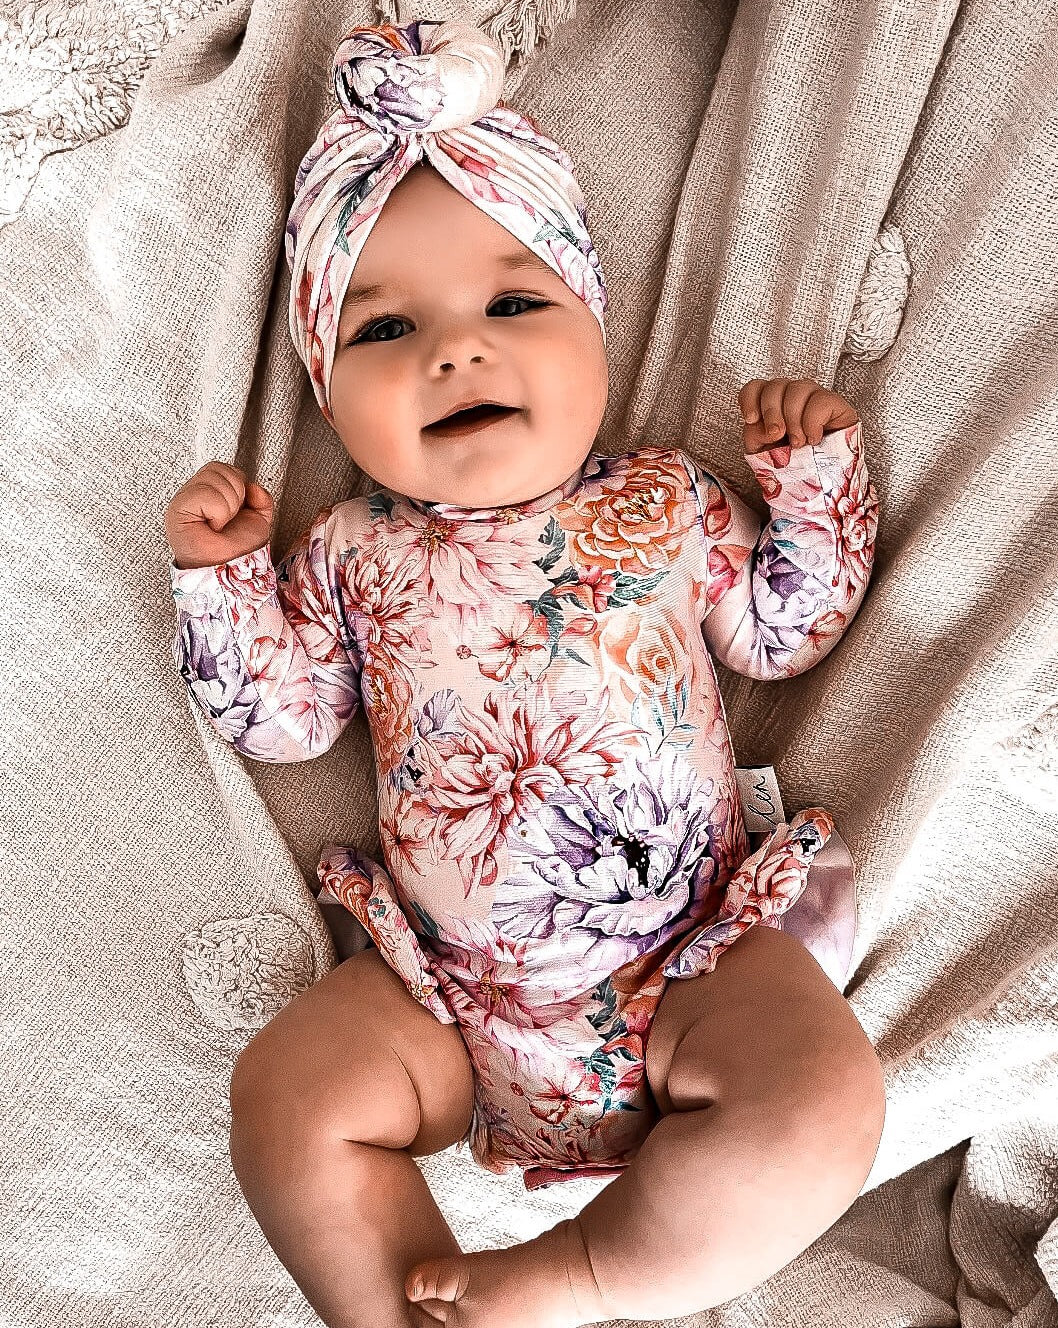 Cute baby girl wearing a floral nappy change swimsuit that has snaps for easy access to nappy changes. The baby girl is wearing a matching swim turban.